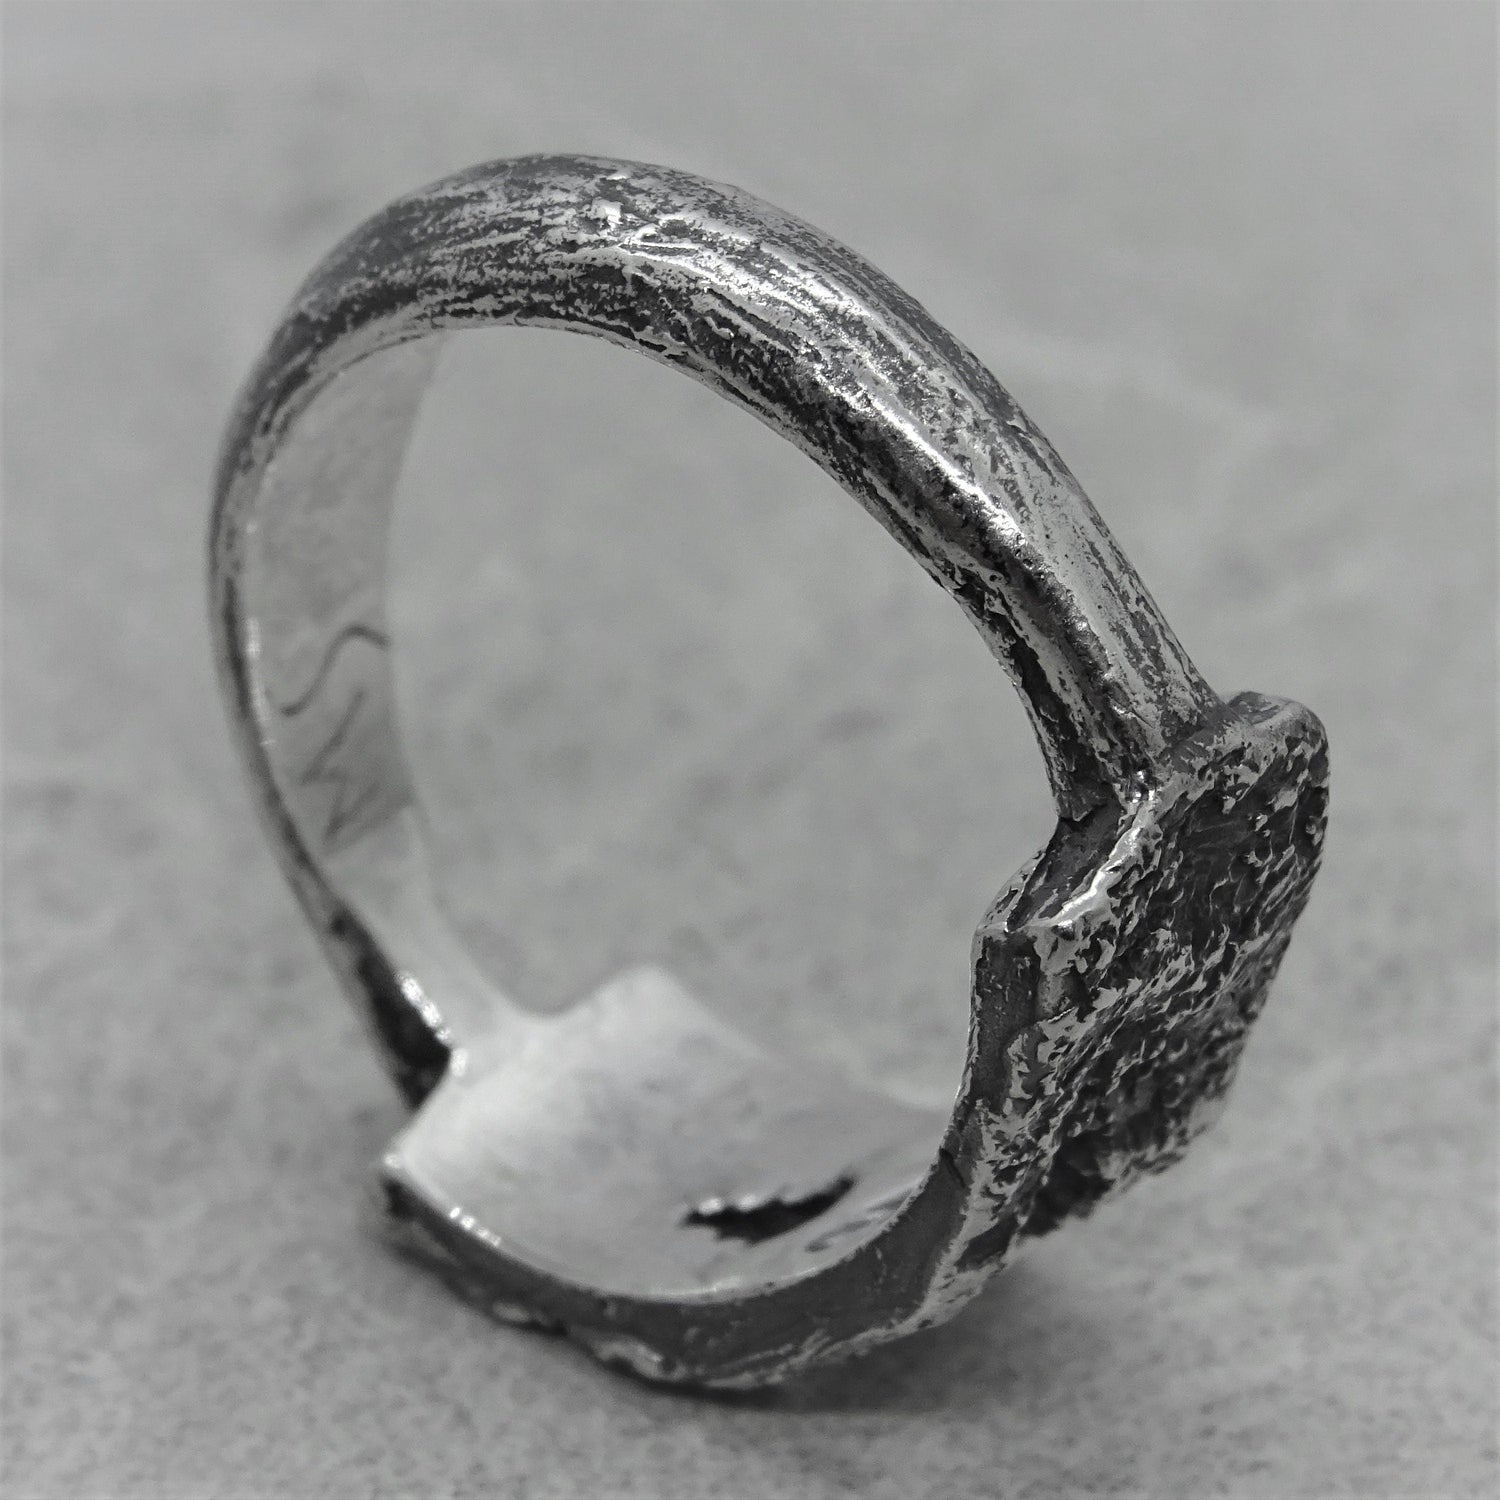 Silver pearl ring- elegant handmade ring with a combination of several textures Lightweight rings Project50g 